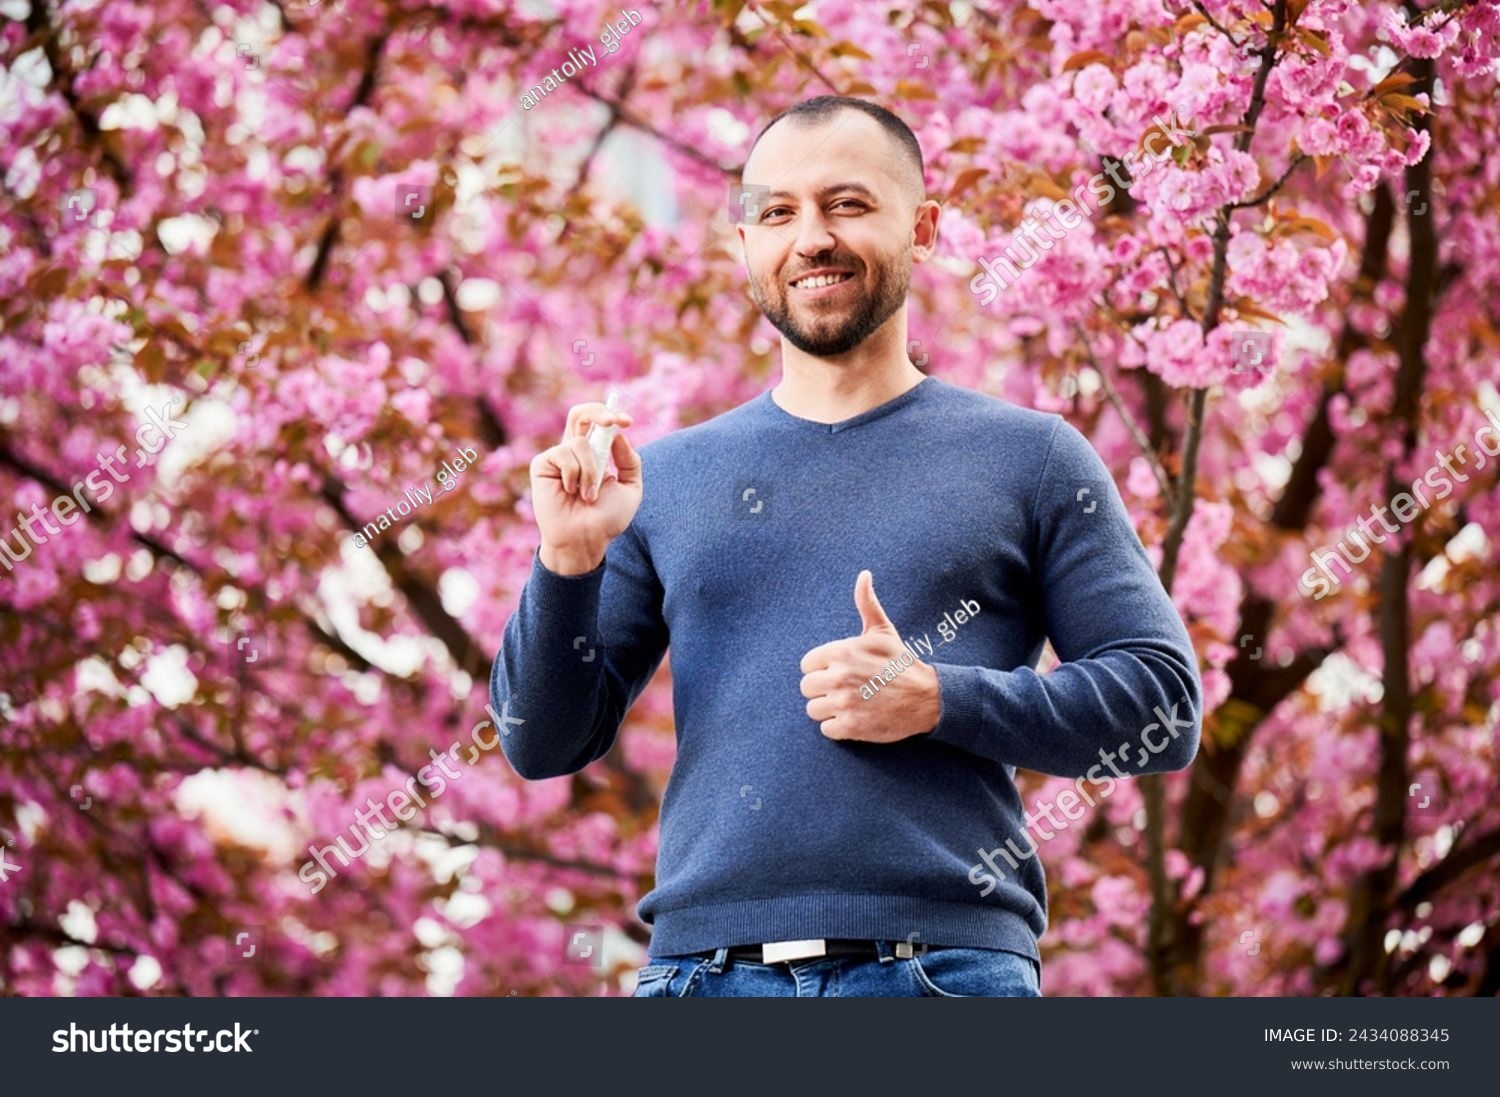 Man allergic using medical nasal drops, suffering from seasonal allergy at spring in blossoming garden. Portrait of smiling man showing thumbs up near blooming tree outdoors. Spring allergy concept. #2434088345